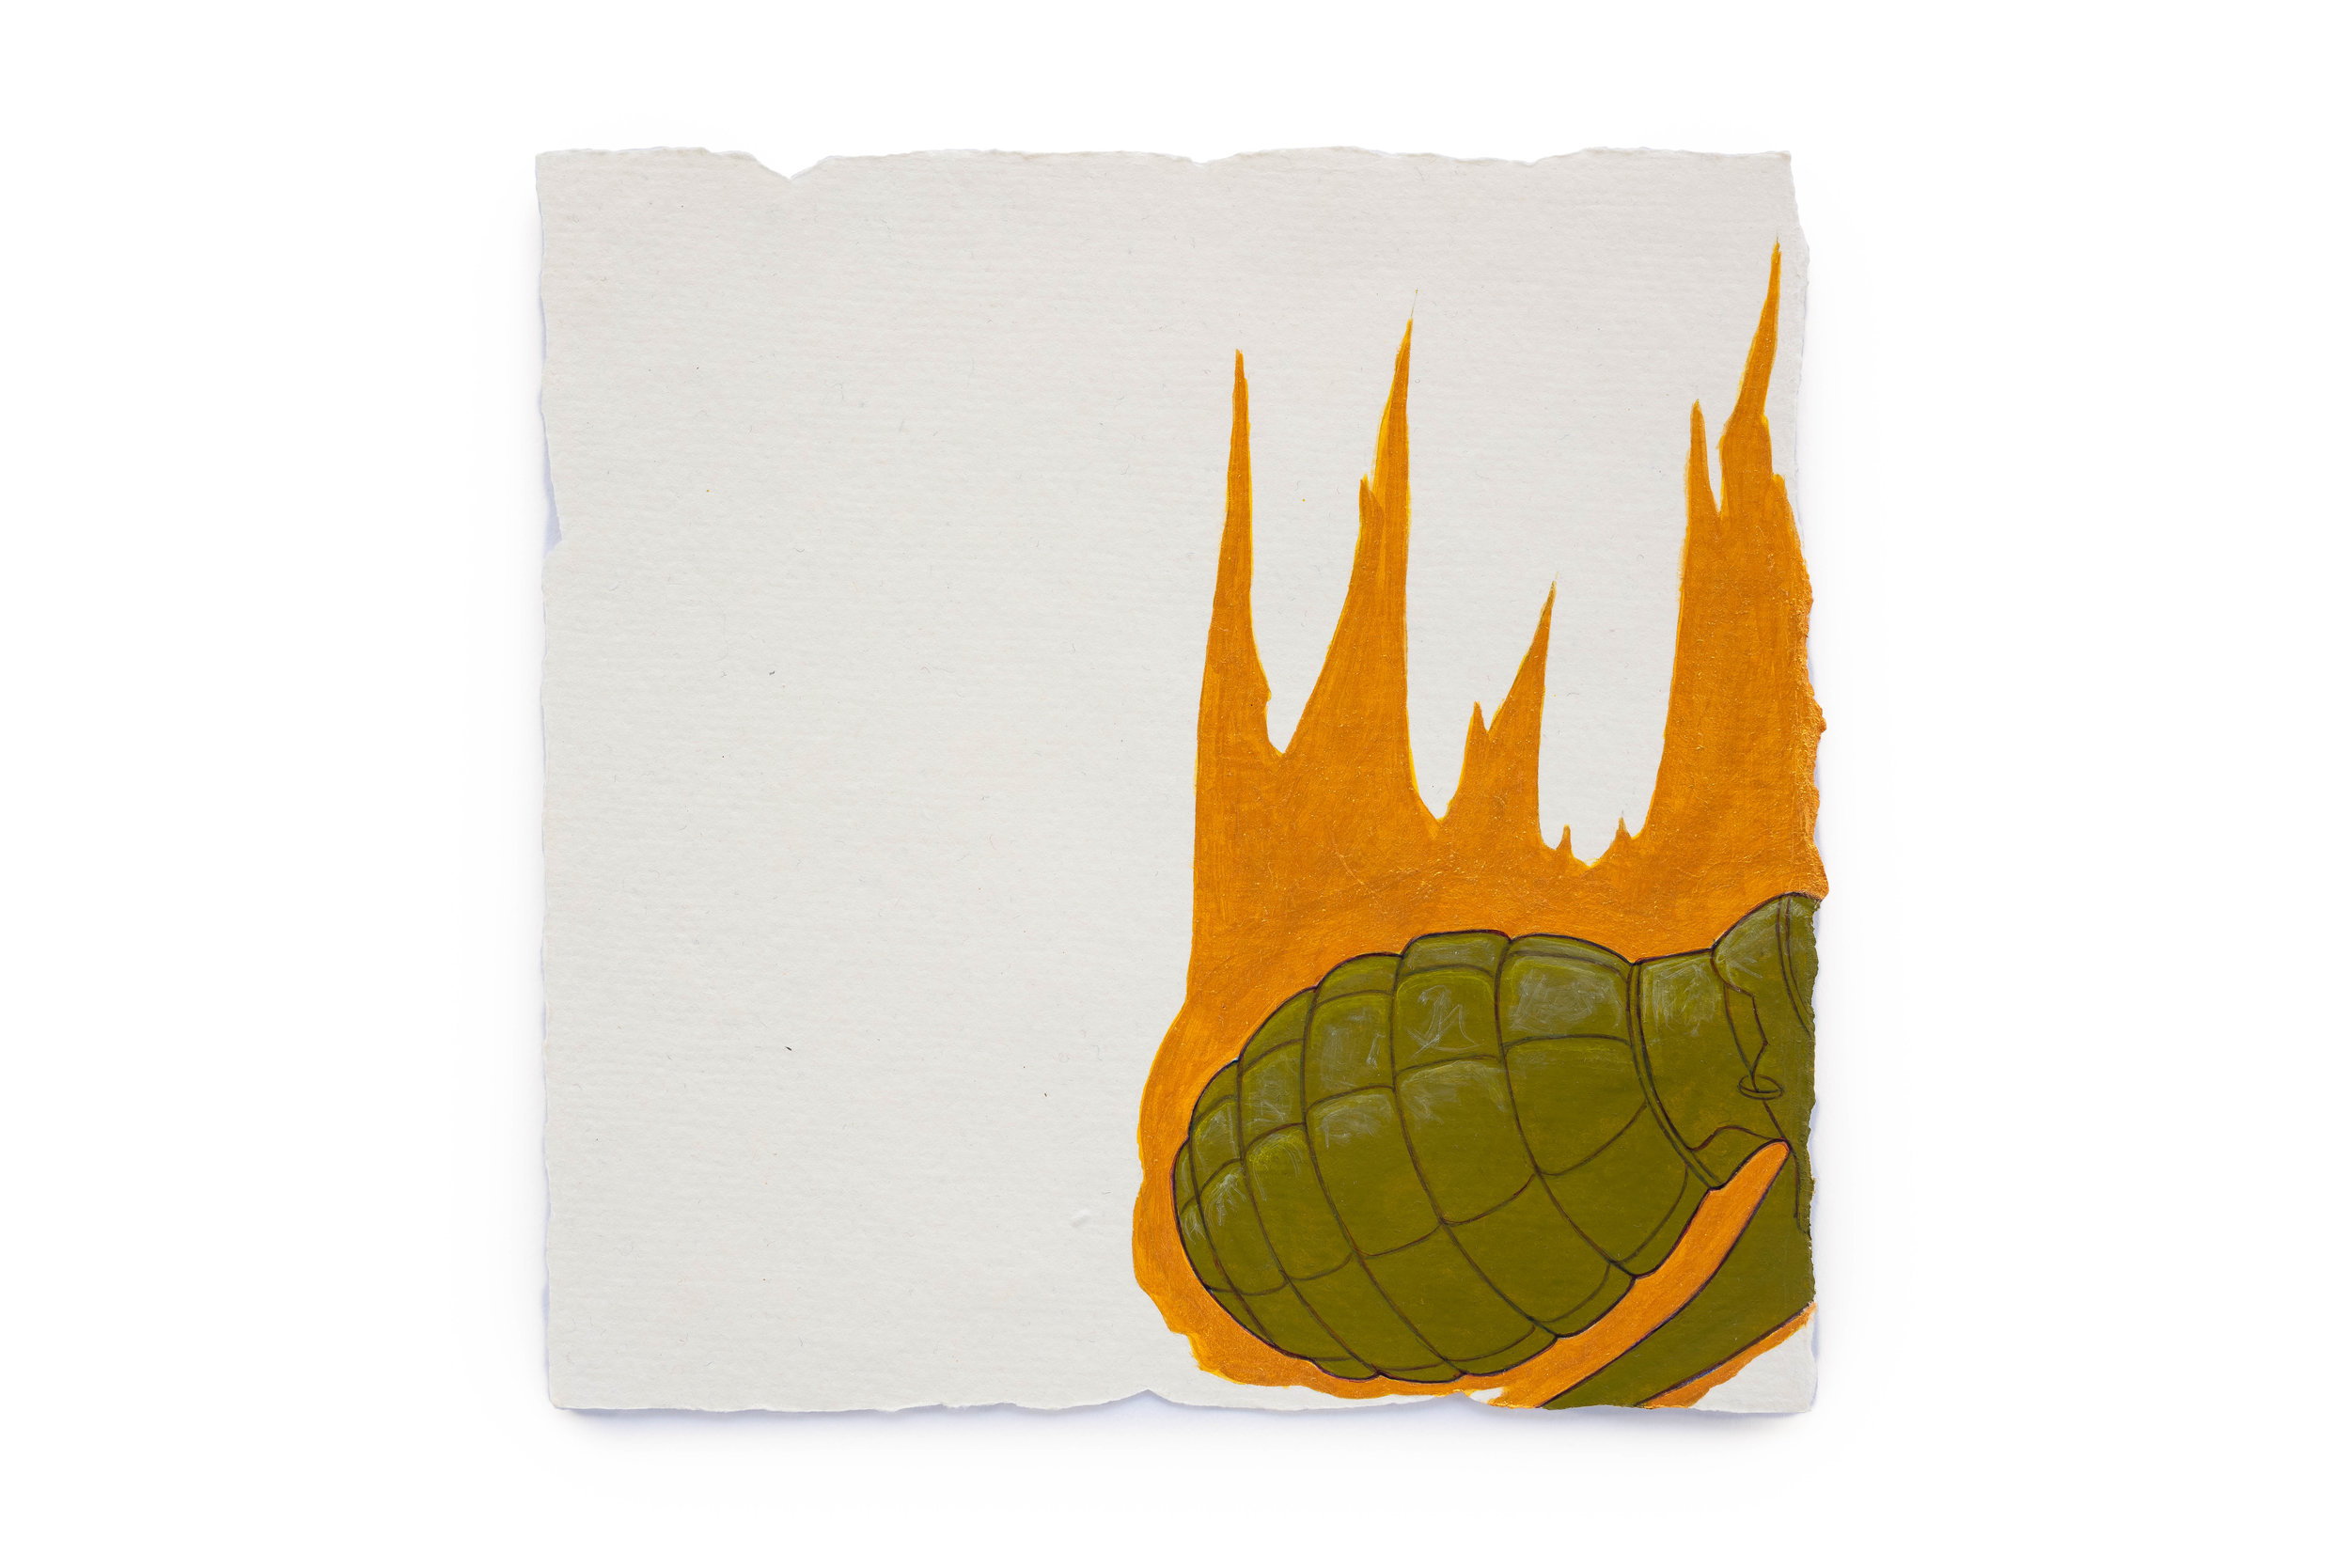   Fire Diary (Flaming Grenade),  2018 Acrylic on paper, 6” x 6”    View Next Set →   